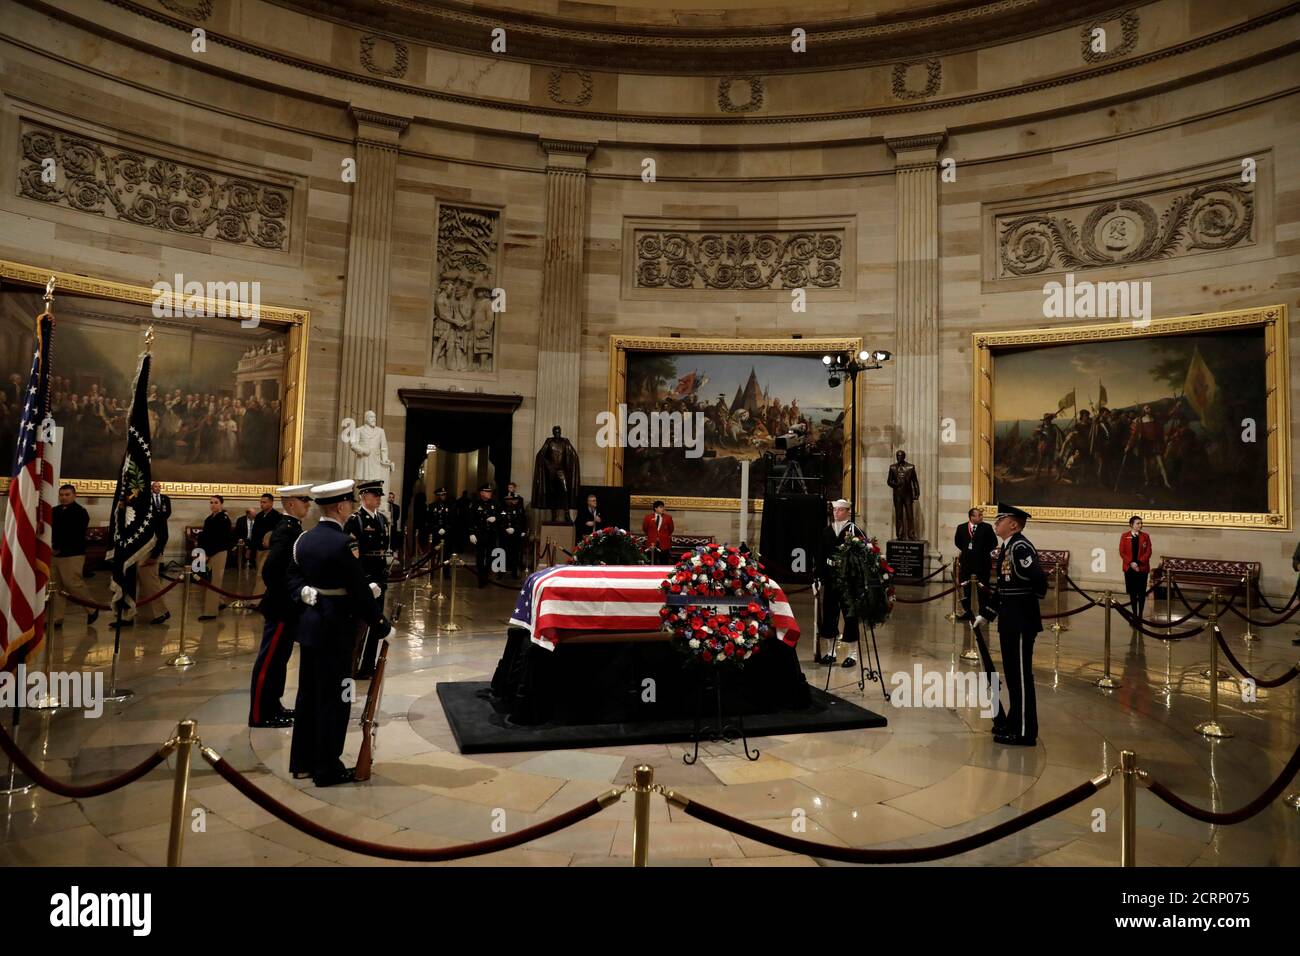 members-of-the-military-honor-guard-stand-at-the-flag-draped-casket-of-former-us-president-george-hw-bush-as-it-lies-in-state-inside-the-us-capitol-rotunda-in-washington-us-december-4-2018-reutersyuri-gripas-2CRP075.jpg